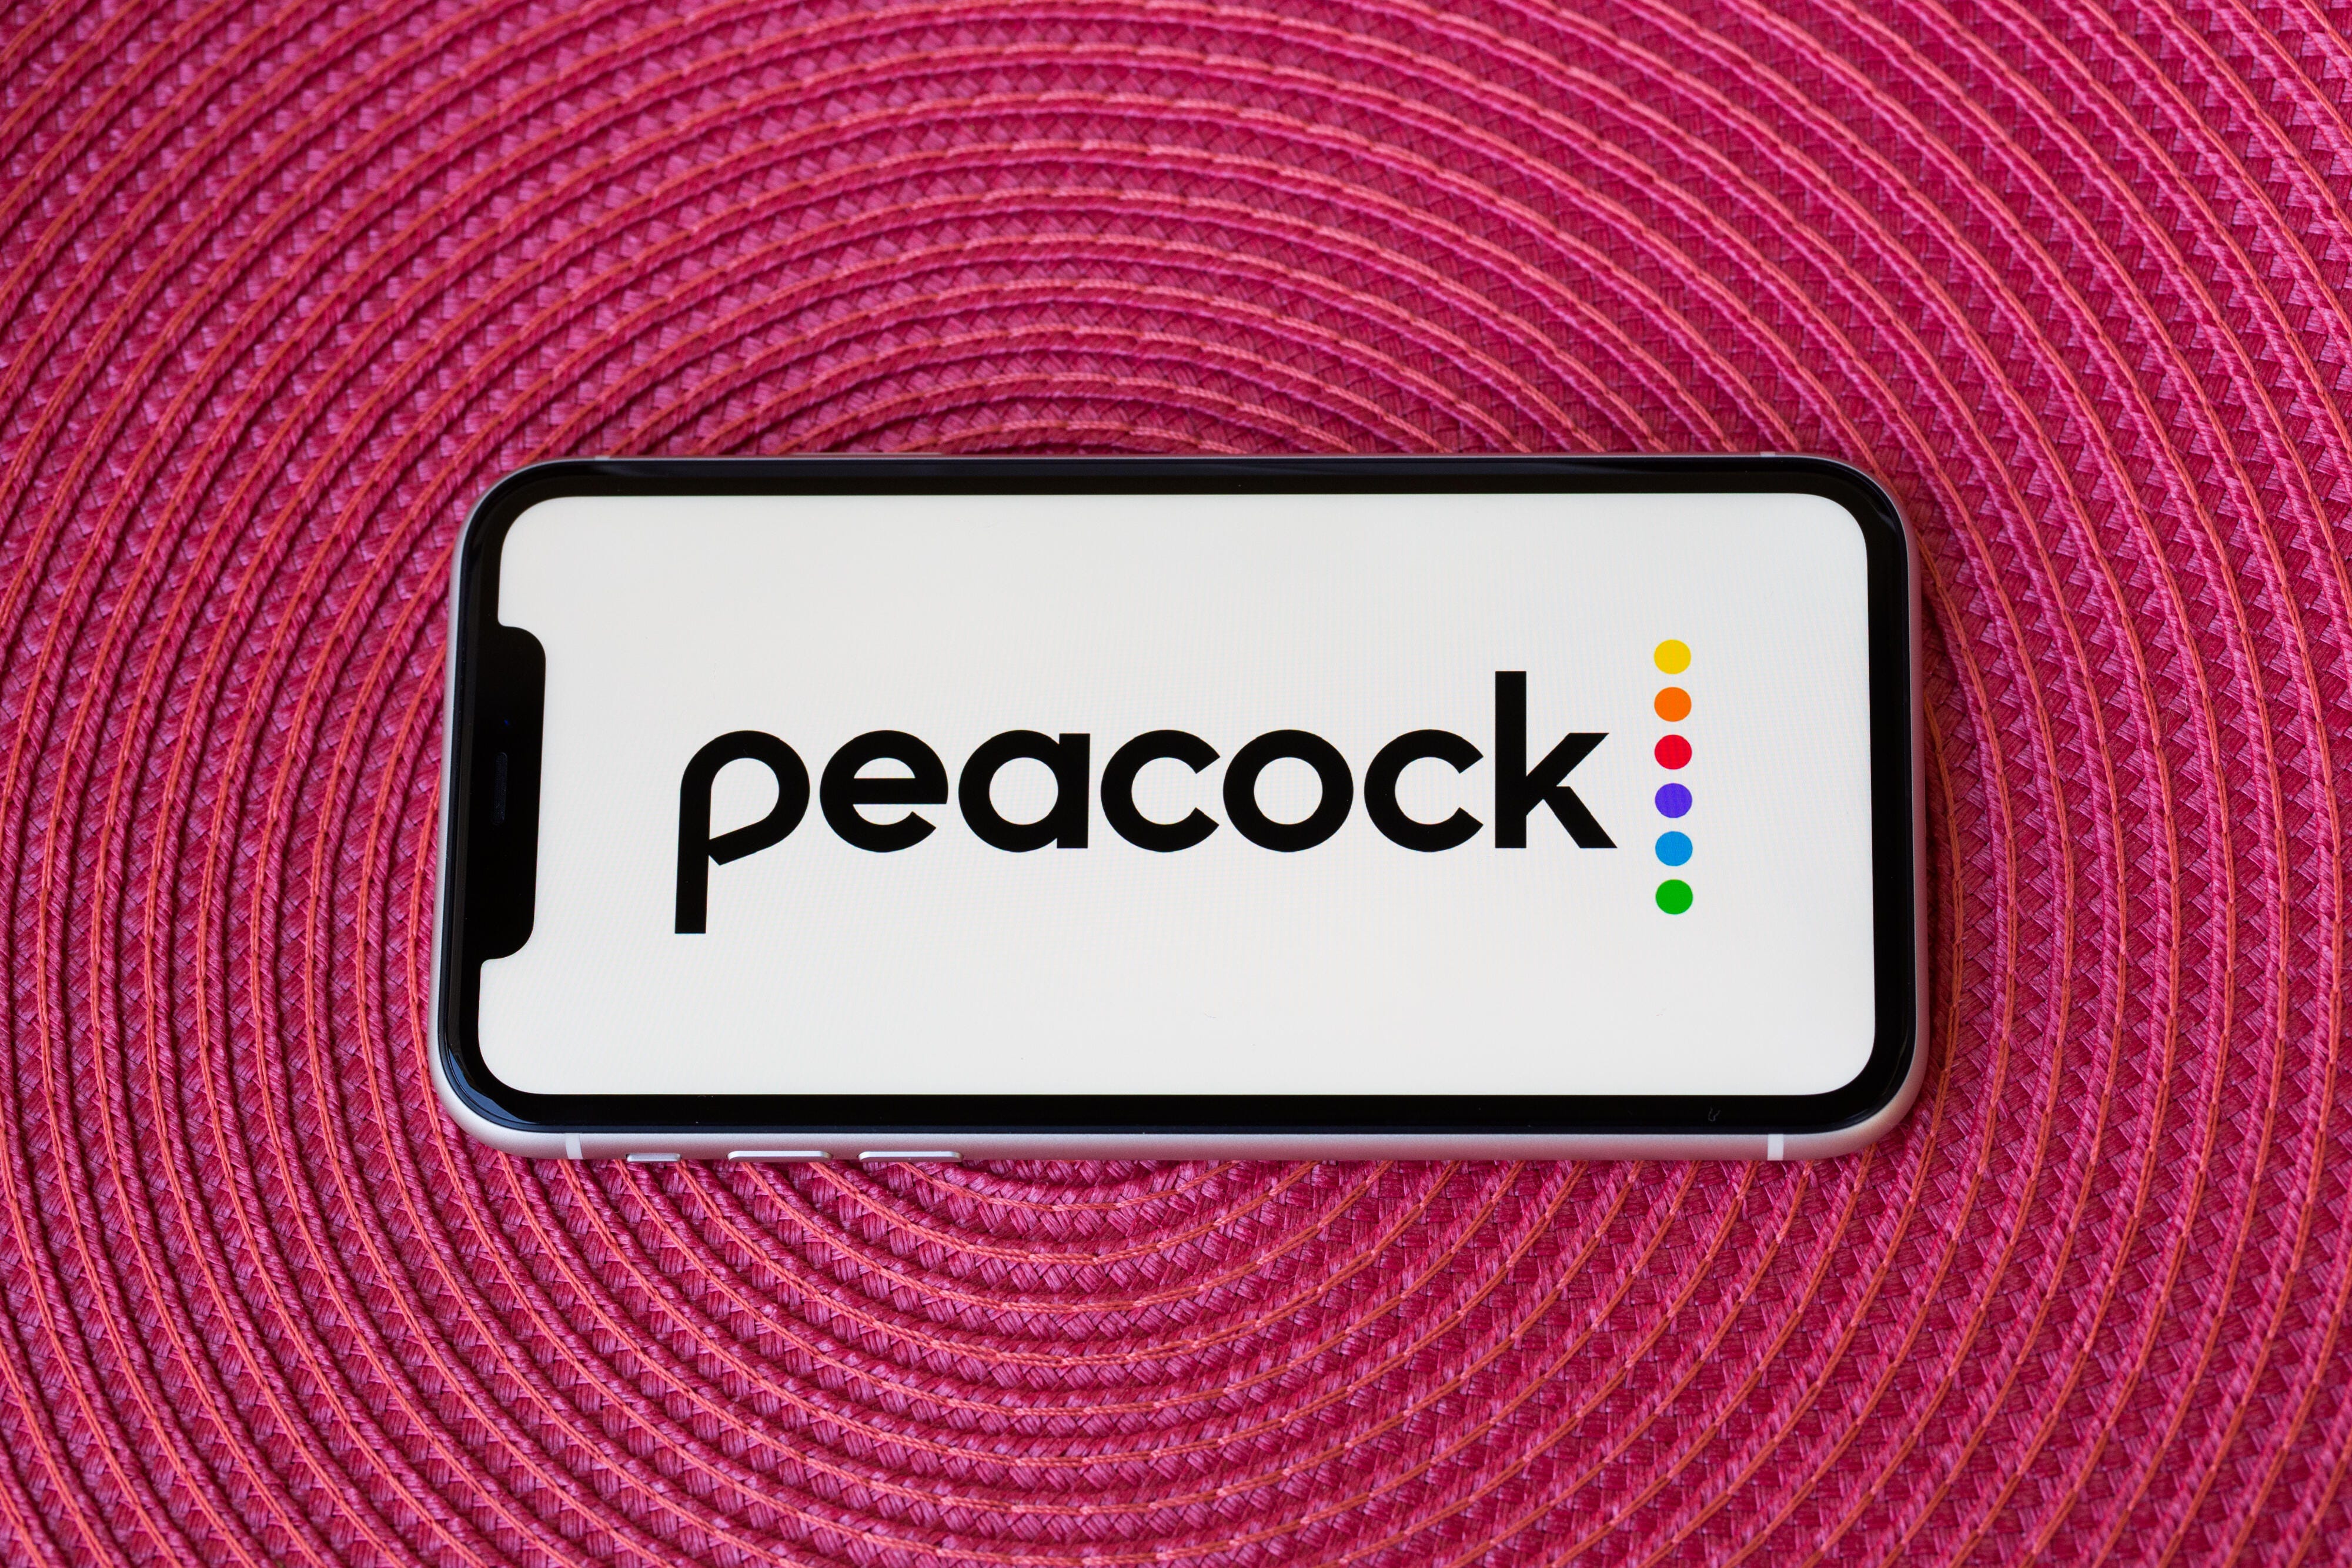 is the nbc app the same as peacock